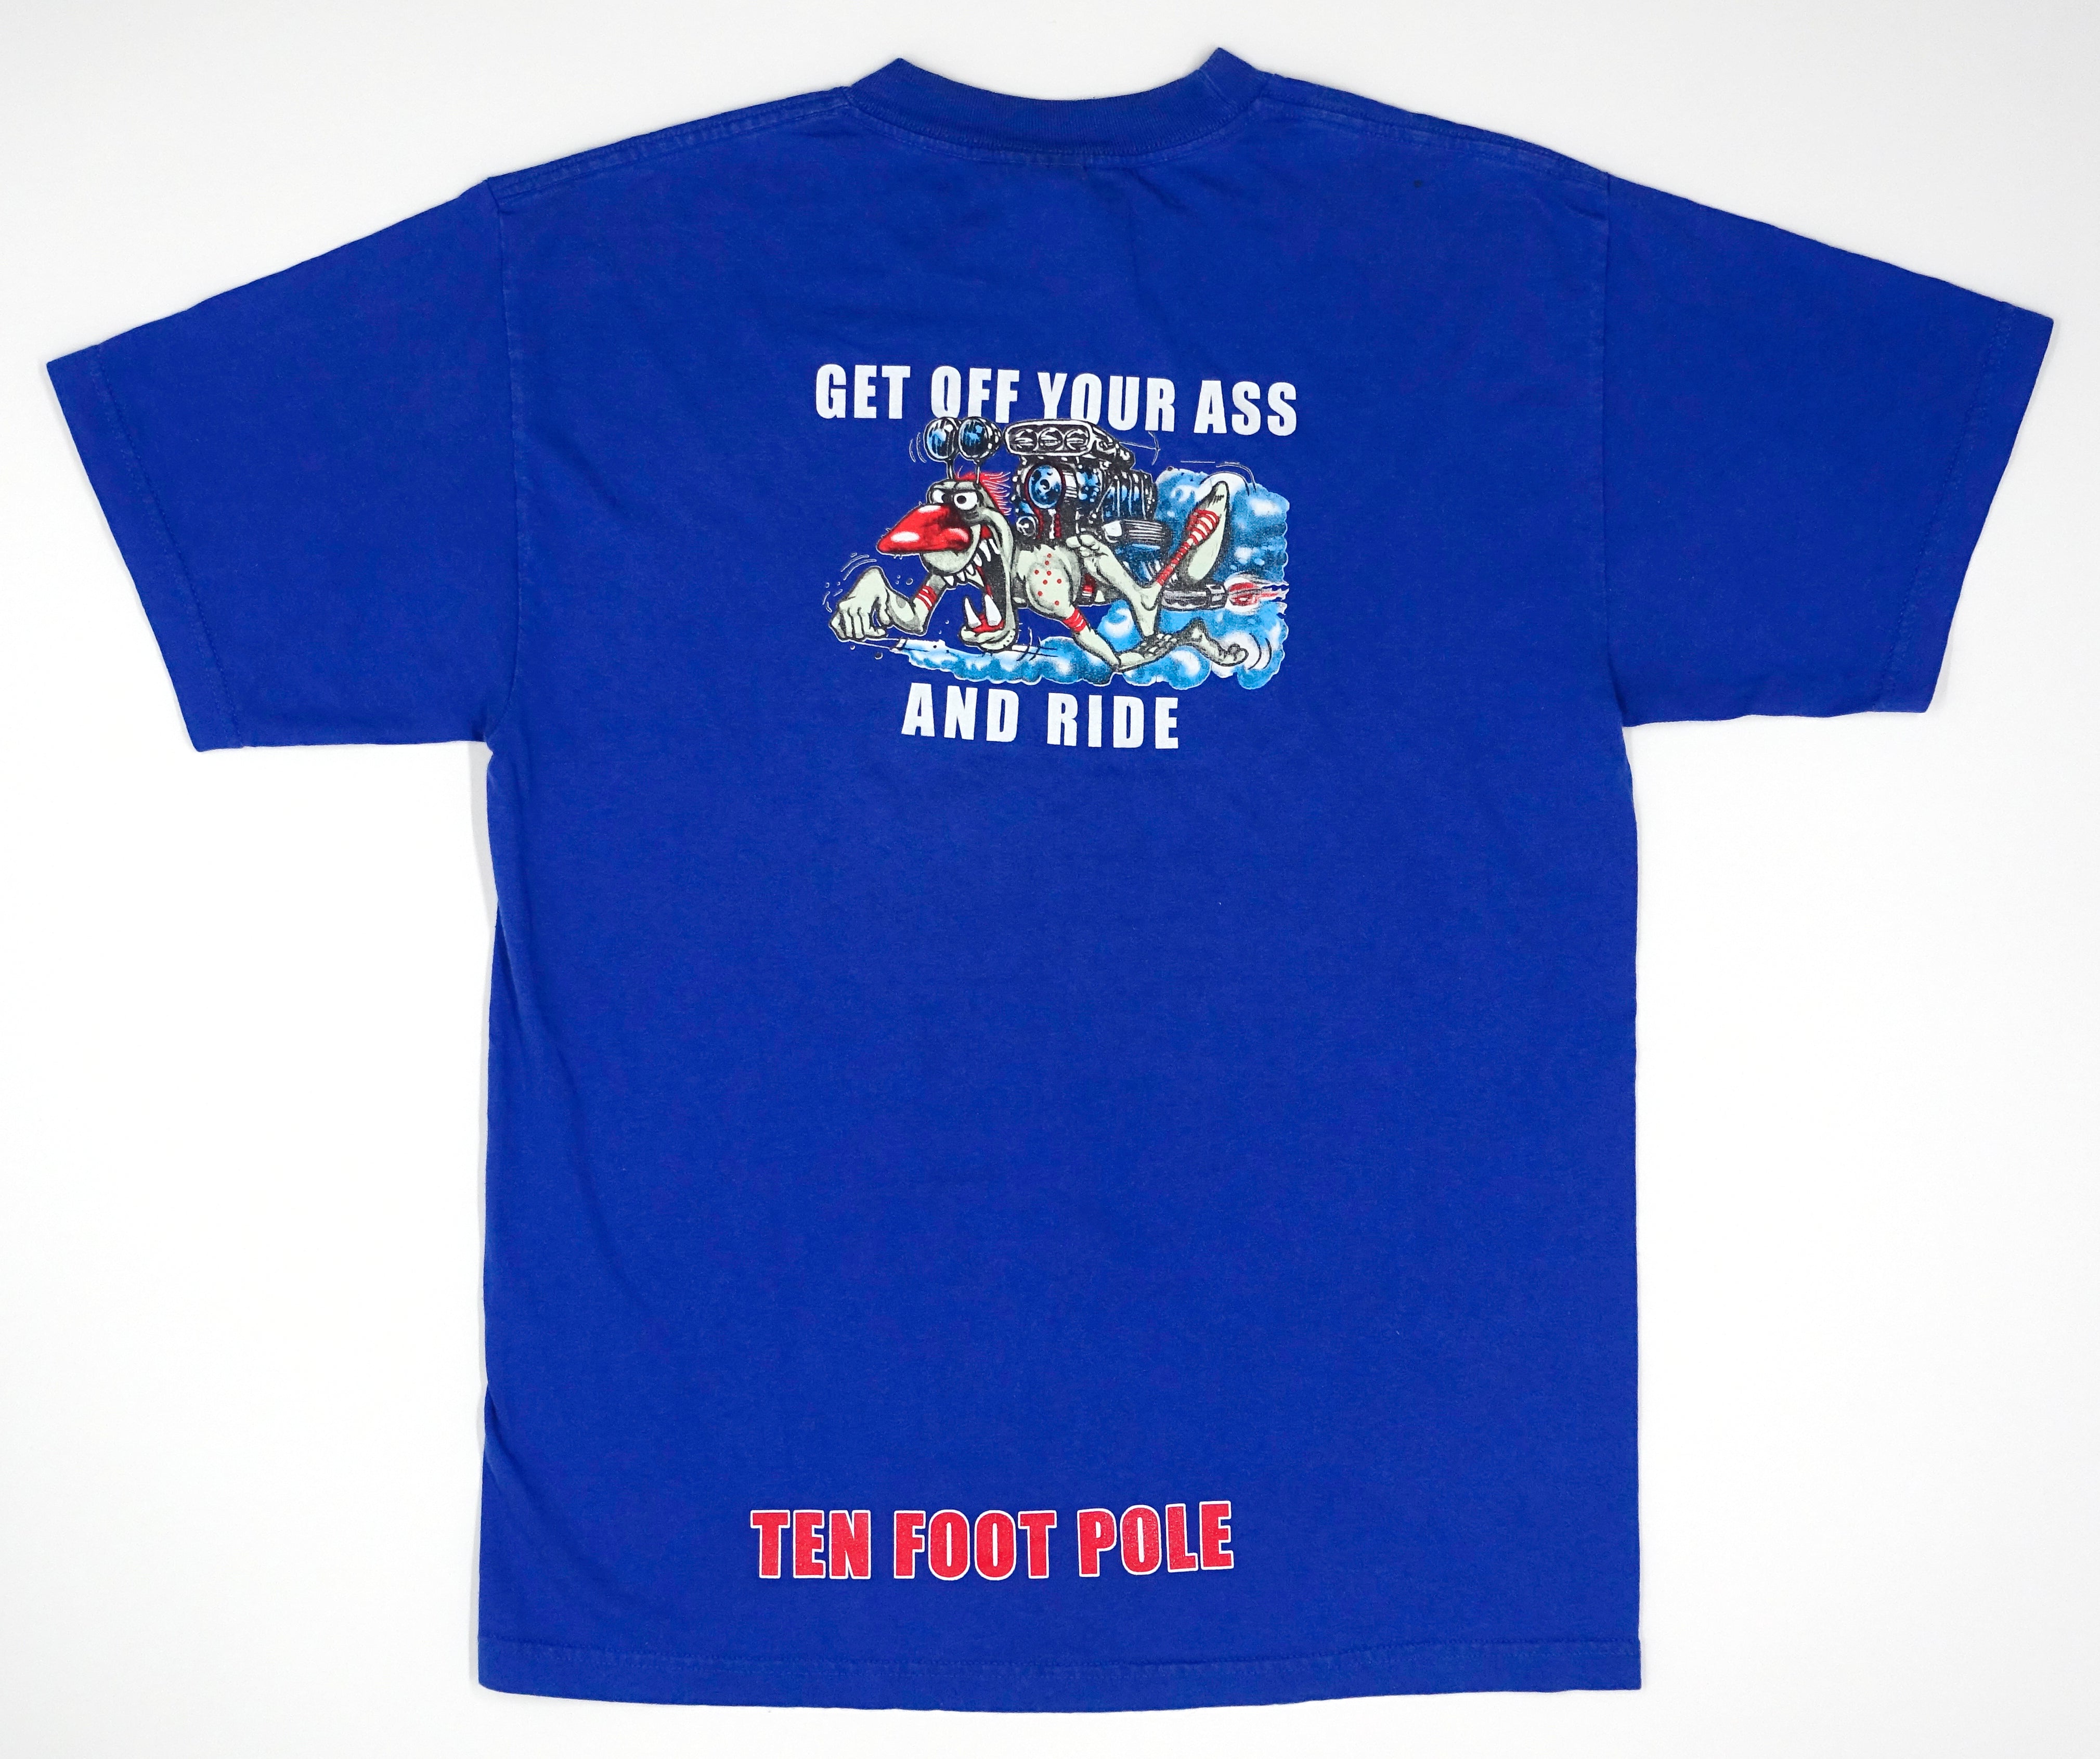 Ten Foot Pole ‎– Got Off Your Ass And Ride 90's Tour Shirt Size Large